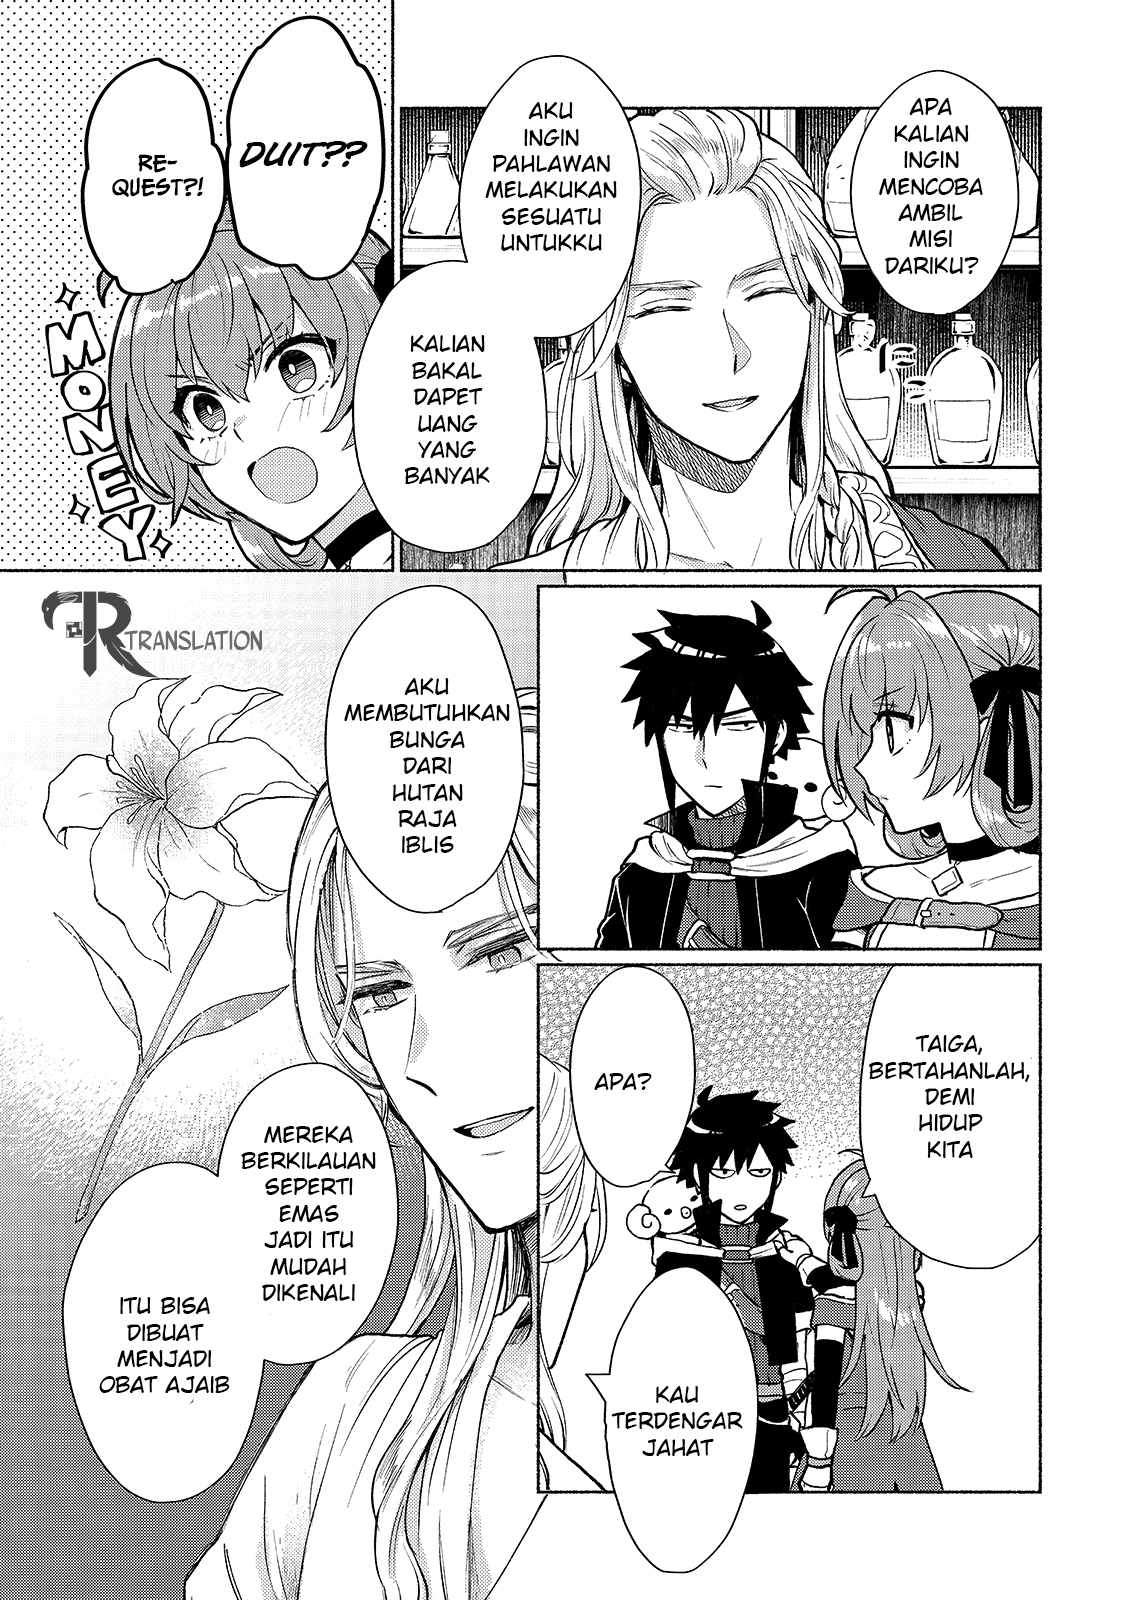 Dilarang COPAS - situs resmi www.mangacanblog.com - Komik when i was reincarnated in another world i was a heroine and he was a hero 005 - chapter 5 6 Indonesia when i was reincarnated in another world i was a heroine and he was a hero 005 - chapter 5 Terbaru 13|Baca Manga Komik Indonesia|Mangacan